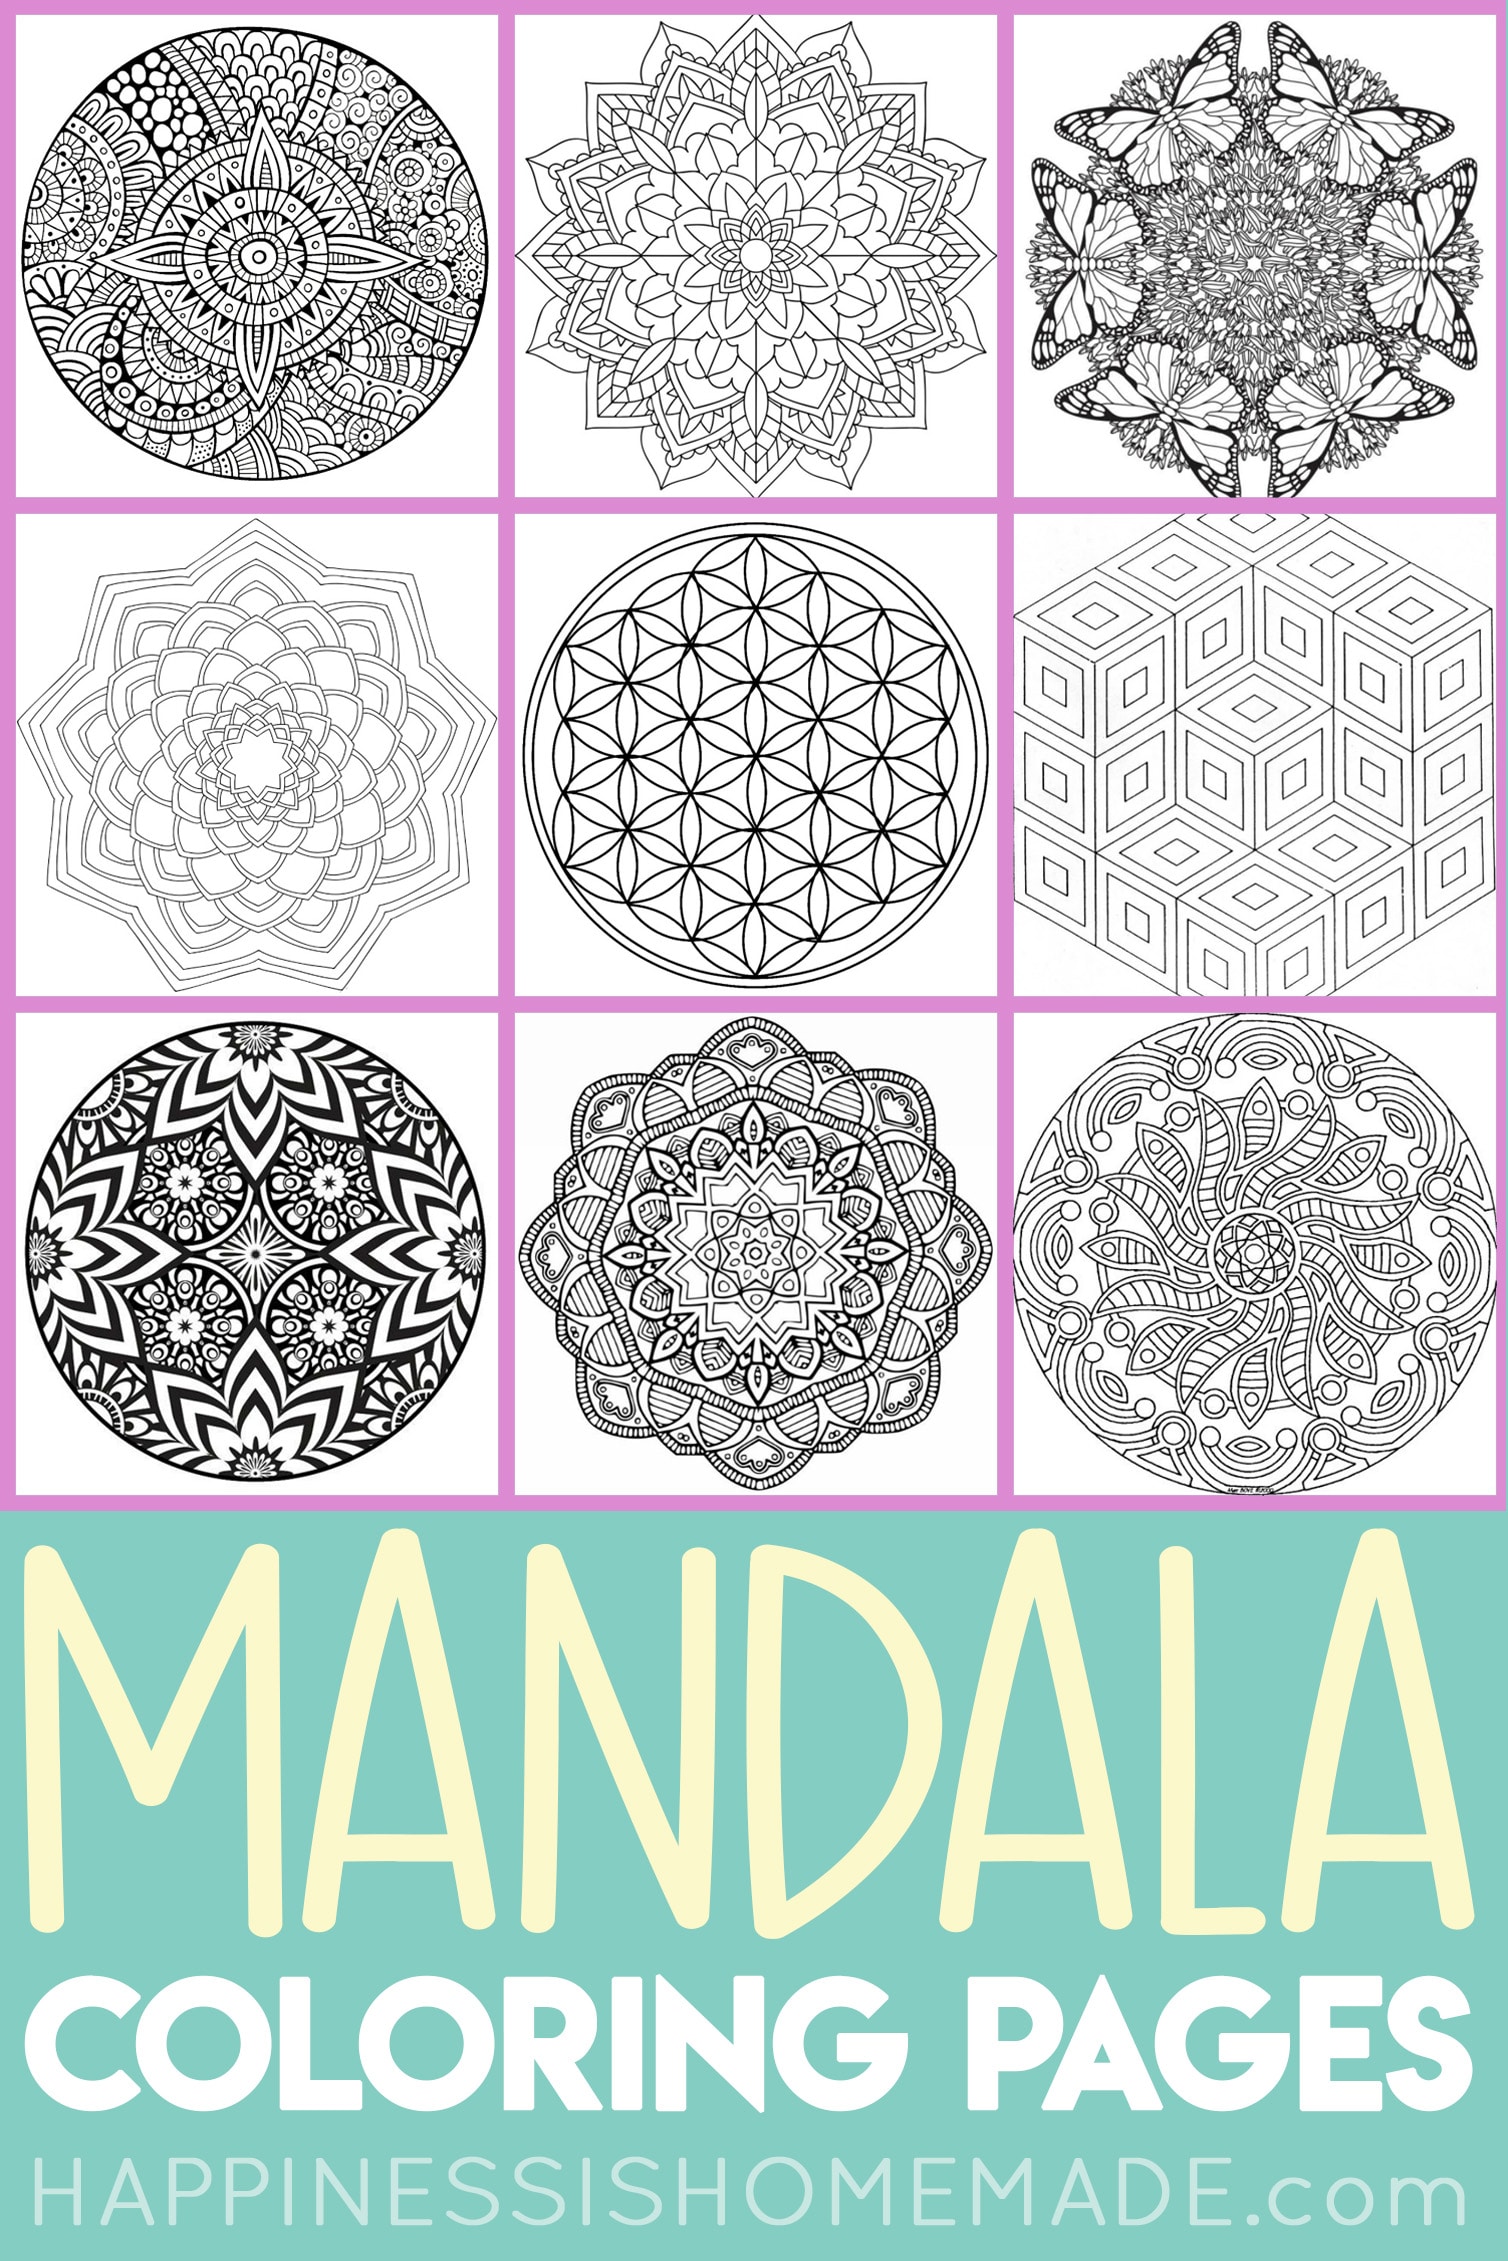 Mandala Color By Number: An Adult Color By Number Coloring Book with  Mandala Color By Number Fun, Easy, and Relaxing Coloring Pages Adult Relax  (Paperback)